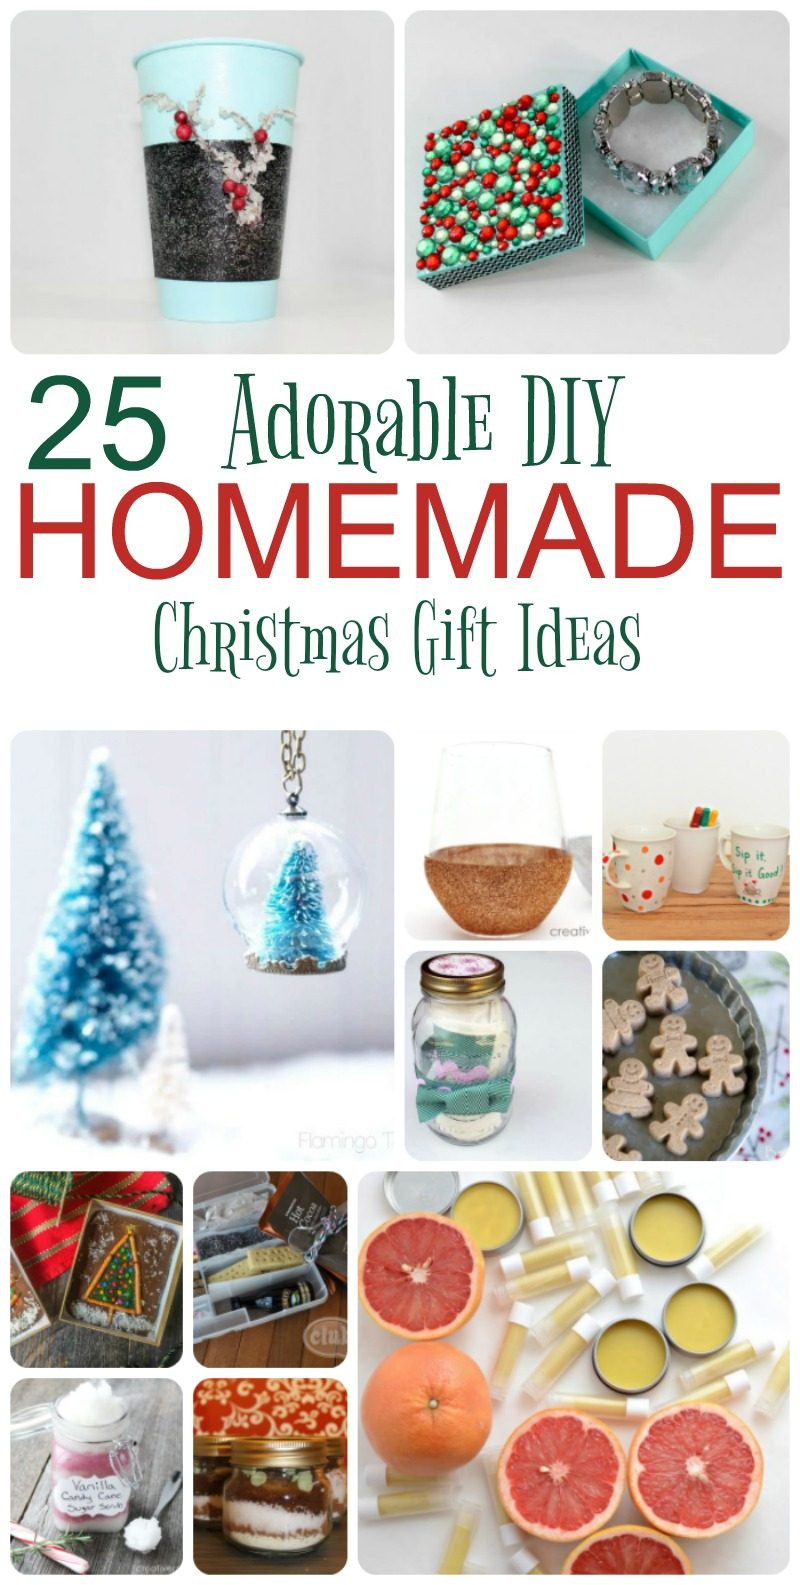 Homemade Gifts For Adults
 25 Adorable Homemade Gifts to Make for Christmas Pretty